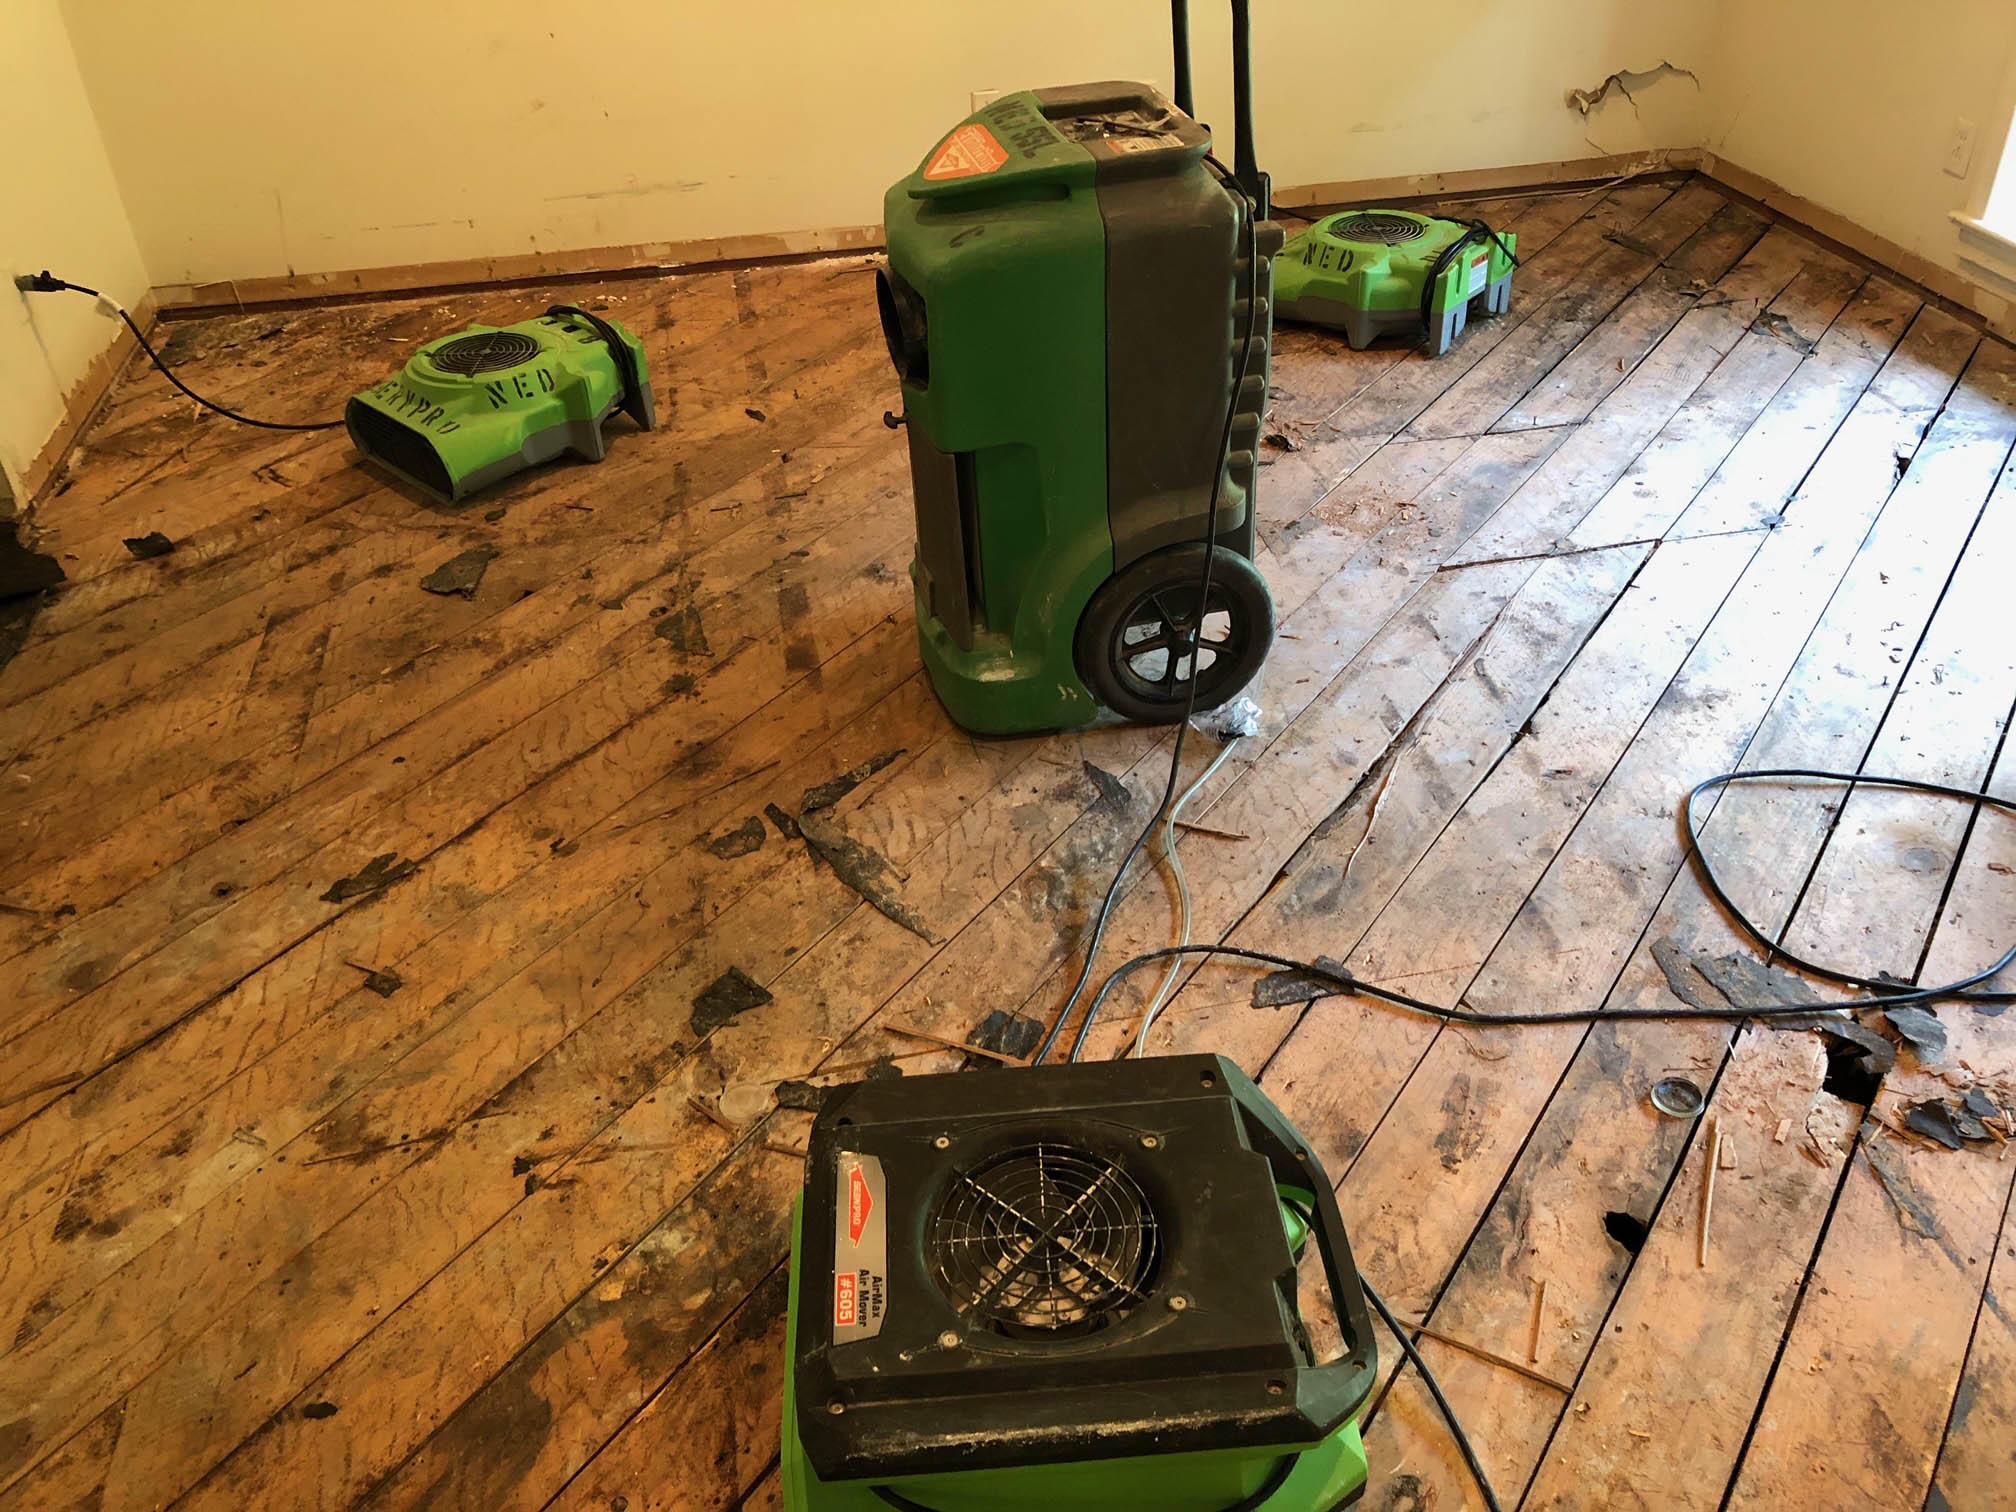 Primary damage may become more significant and secondary damage may become more likely 24 hours following a water loss. For emergency water restoration services in Lakeview, TX, contact SERVPRO of South Garland 24 hours a day, 365 days a year.